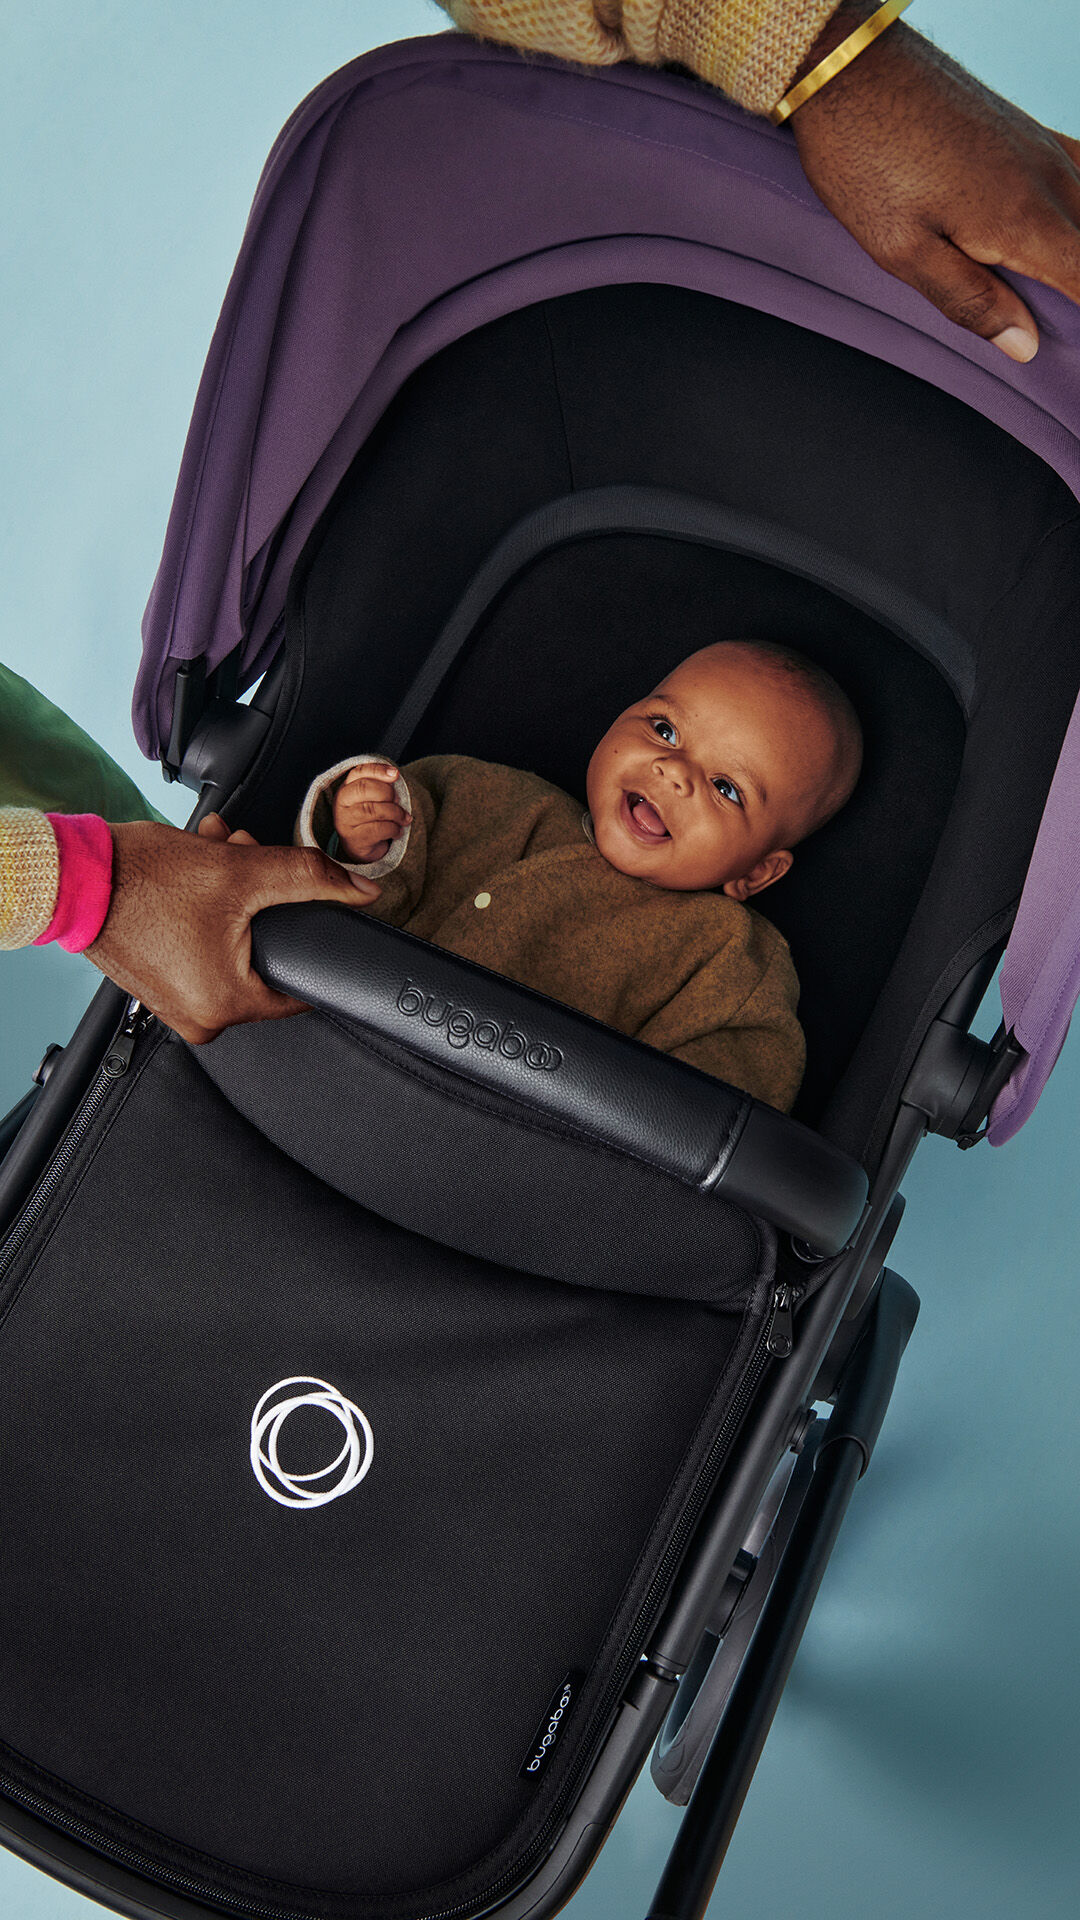 Baby smiling inside a Bugaboo carrycot.